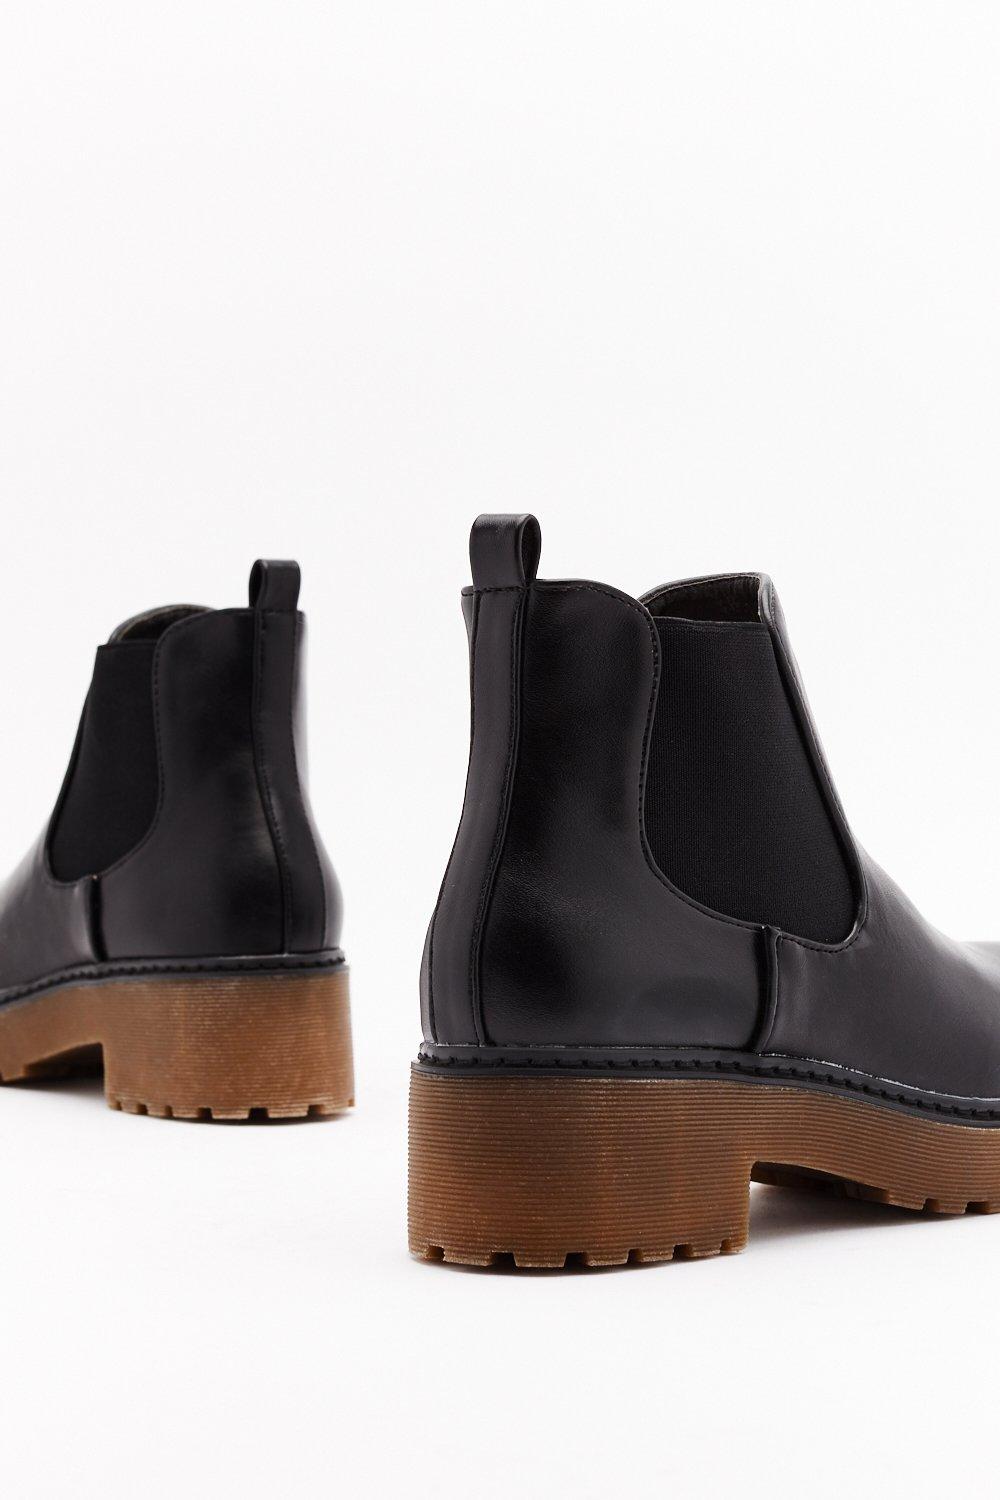 next chunky chelsea boots